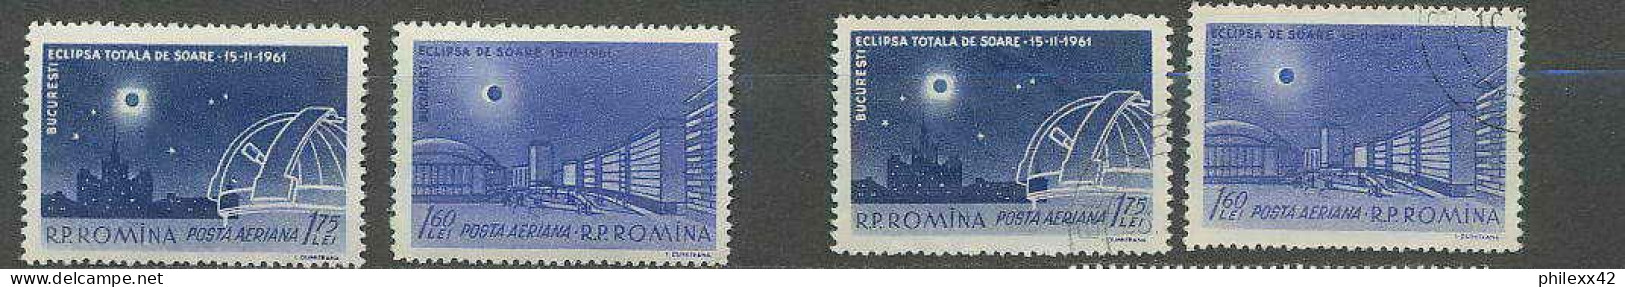 2380/ Espace (space) Neuf ** MNH Roumanie (Romania) Eclipse Solaire + Used - Europe